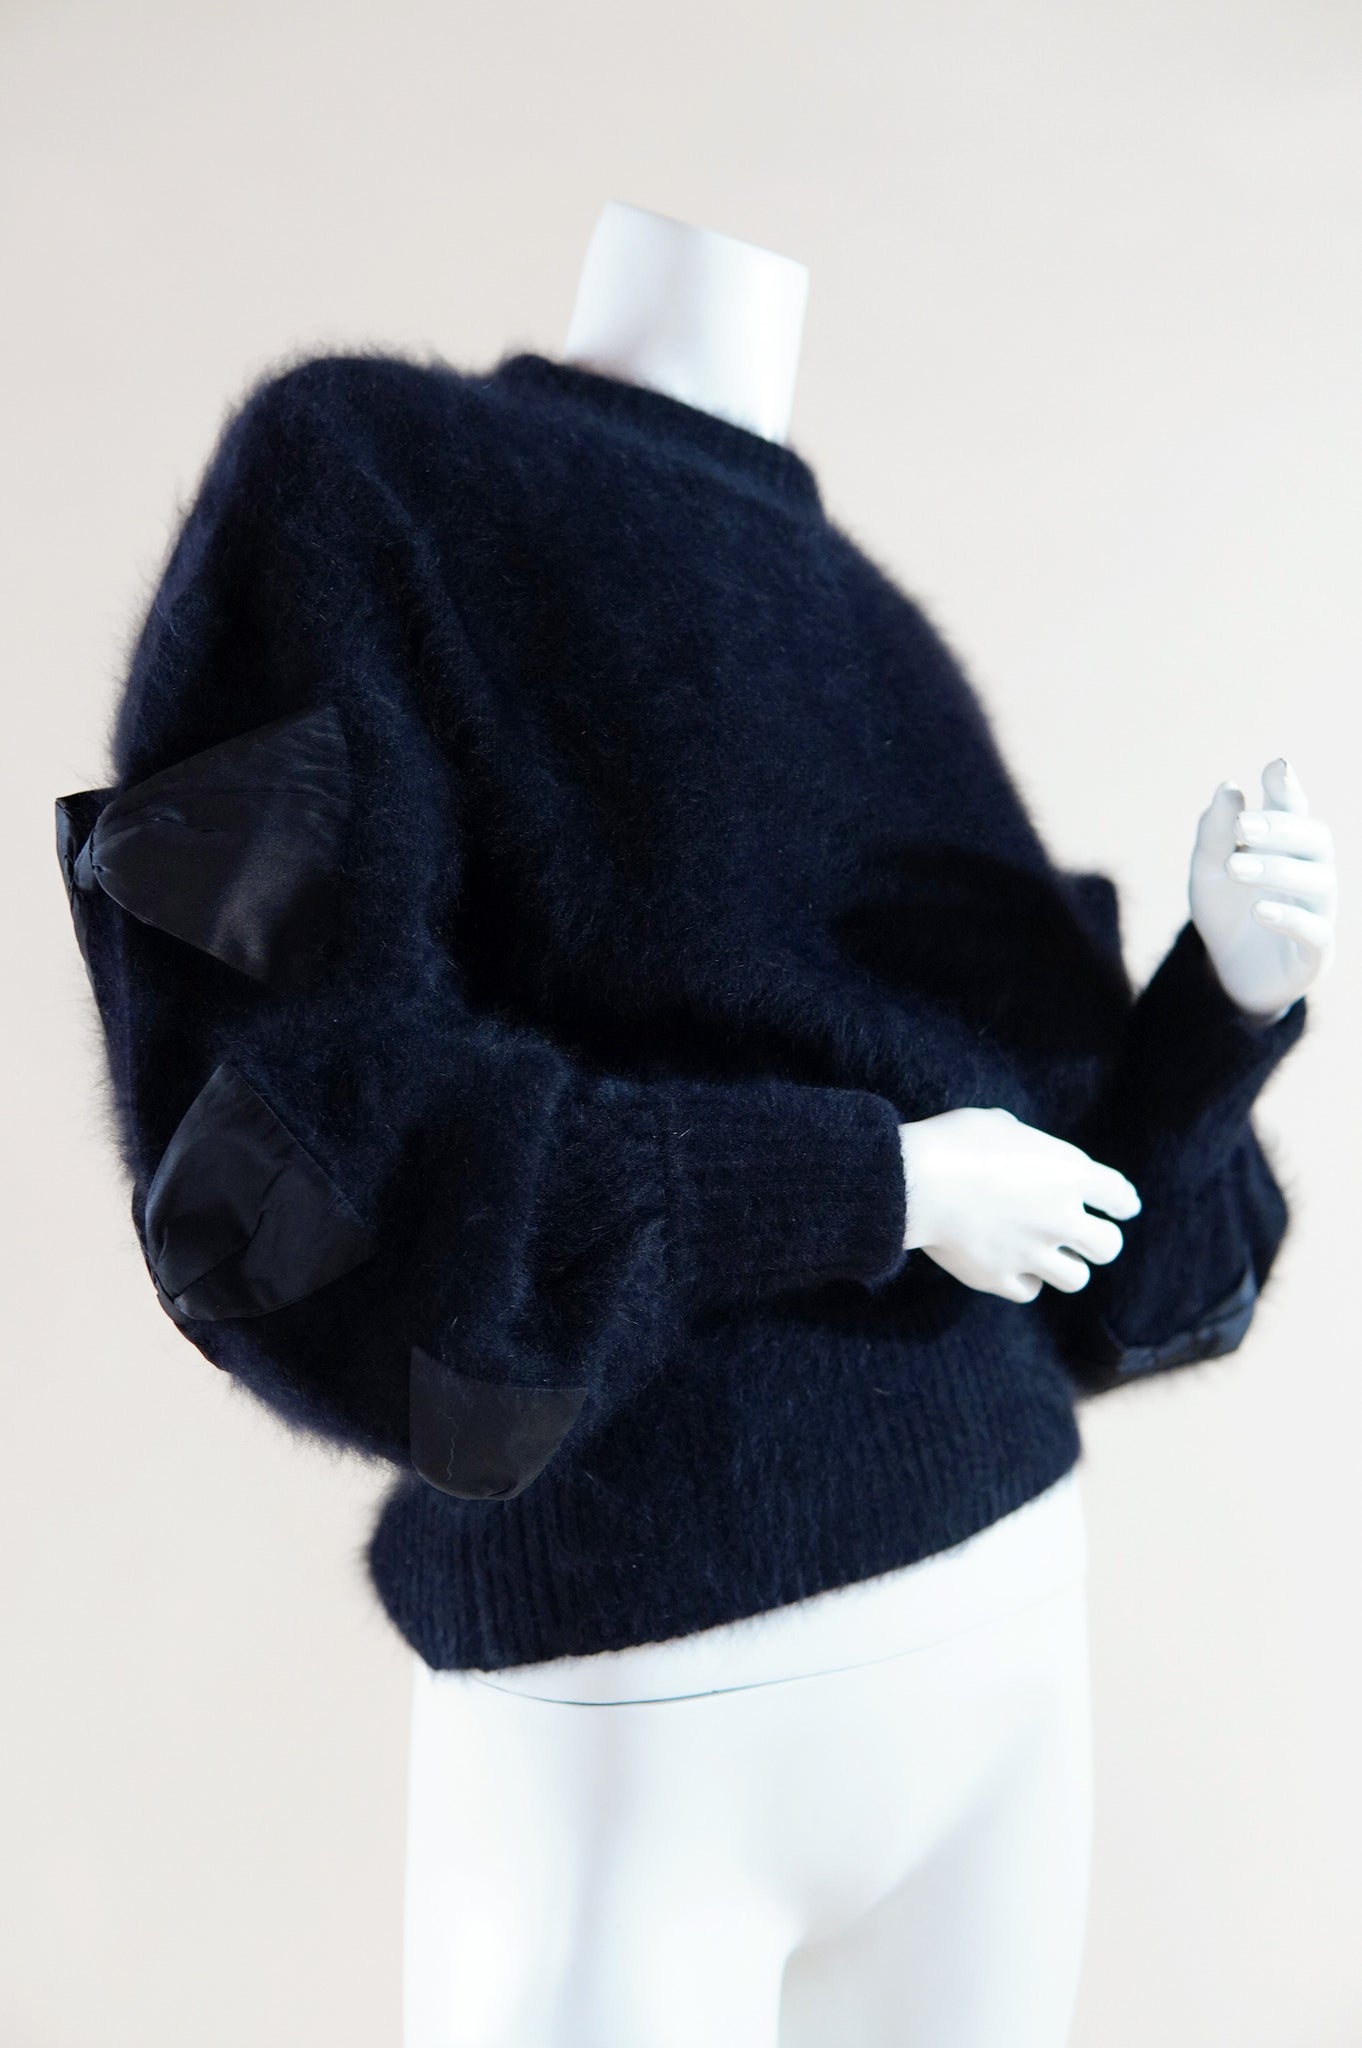 RESERVED 1980s Fendi by Karl Lagerfeld sweater with bows - S/M